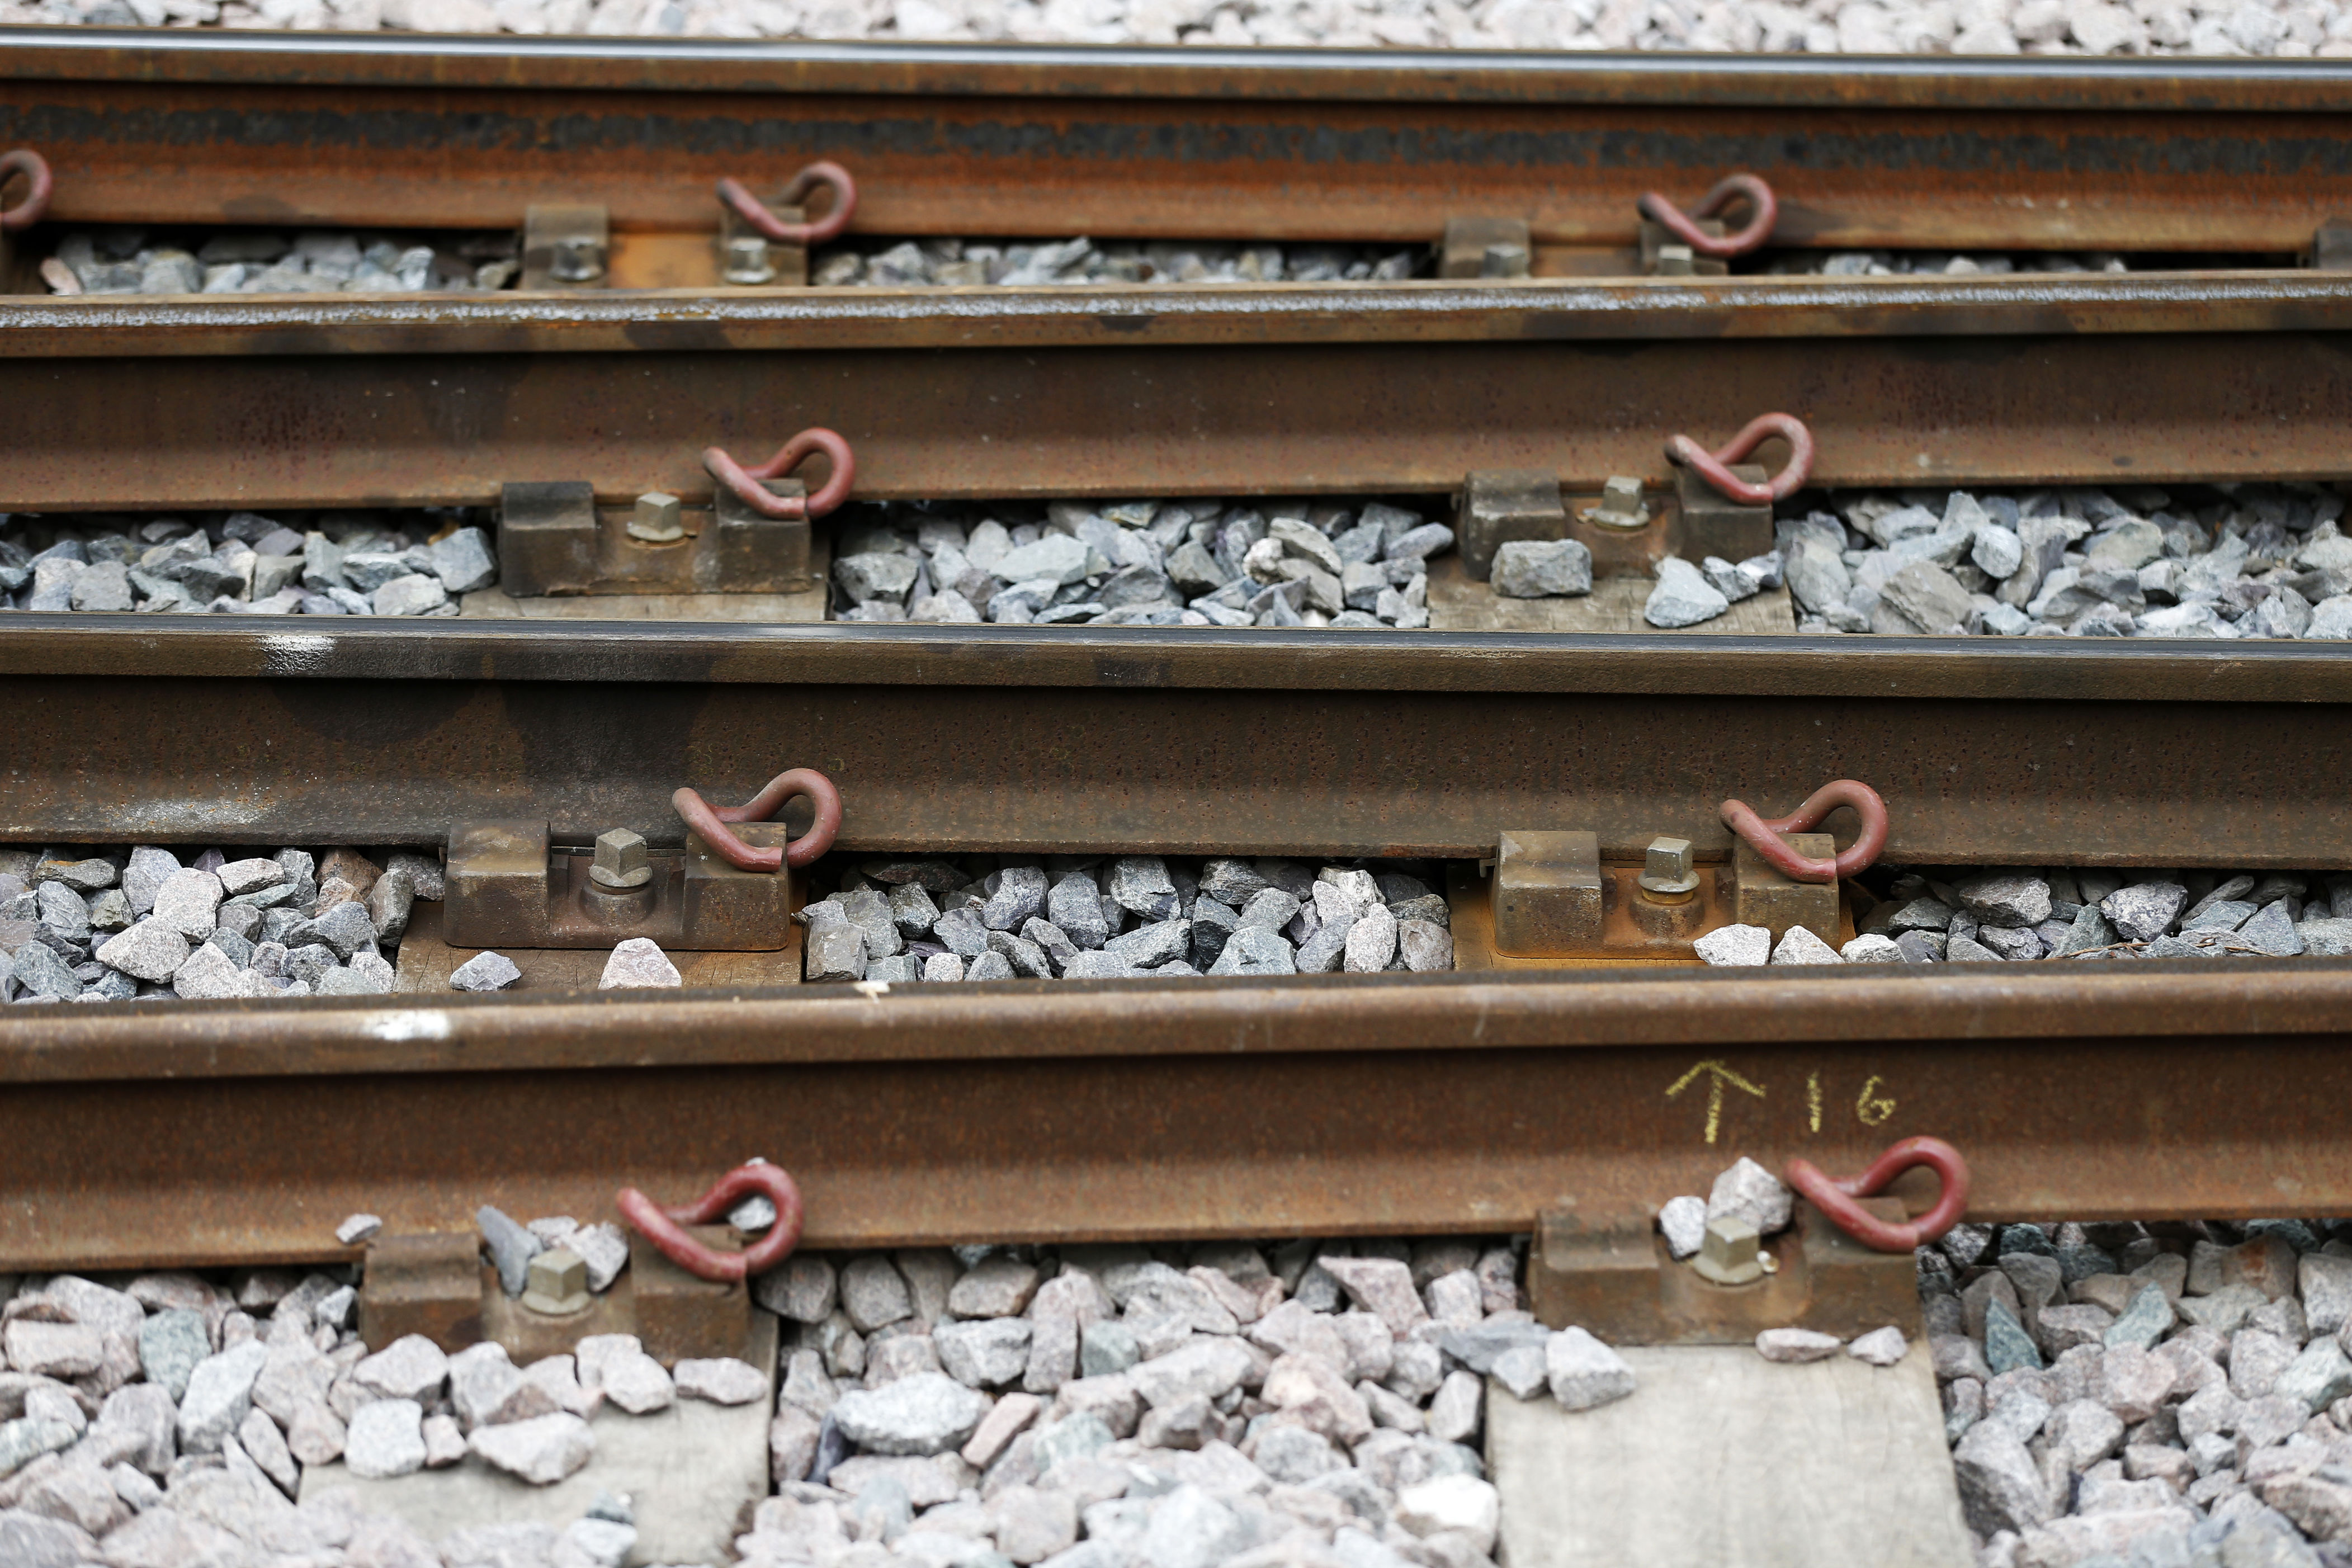 draft bill sets out plans for major rail reform